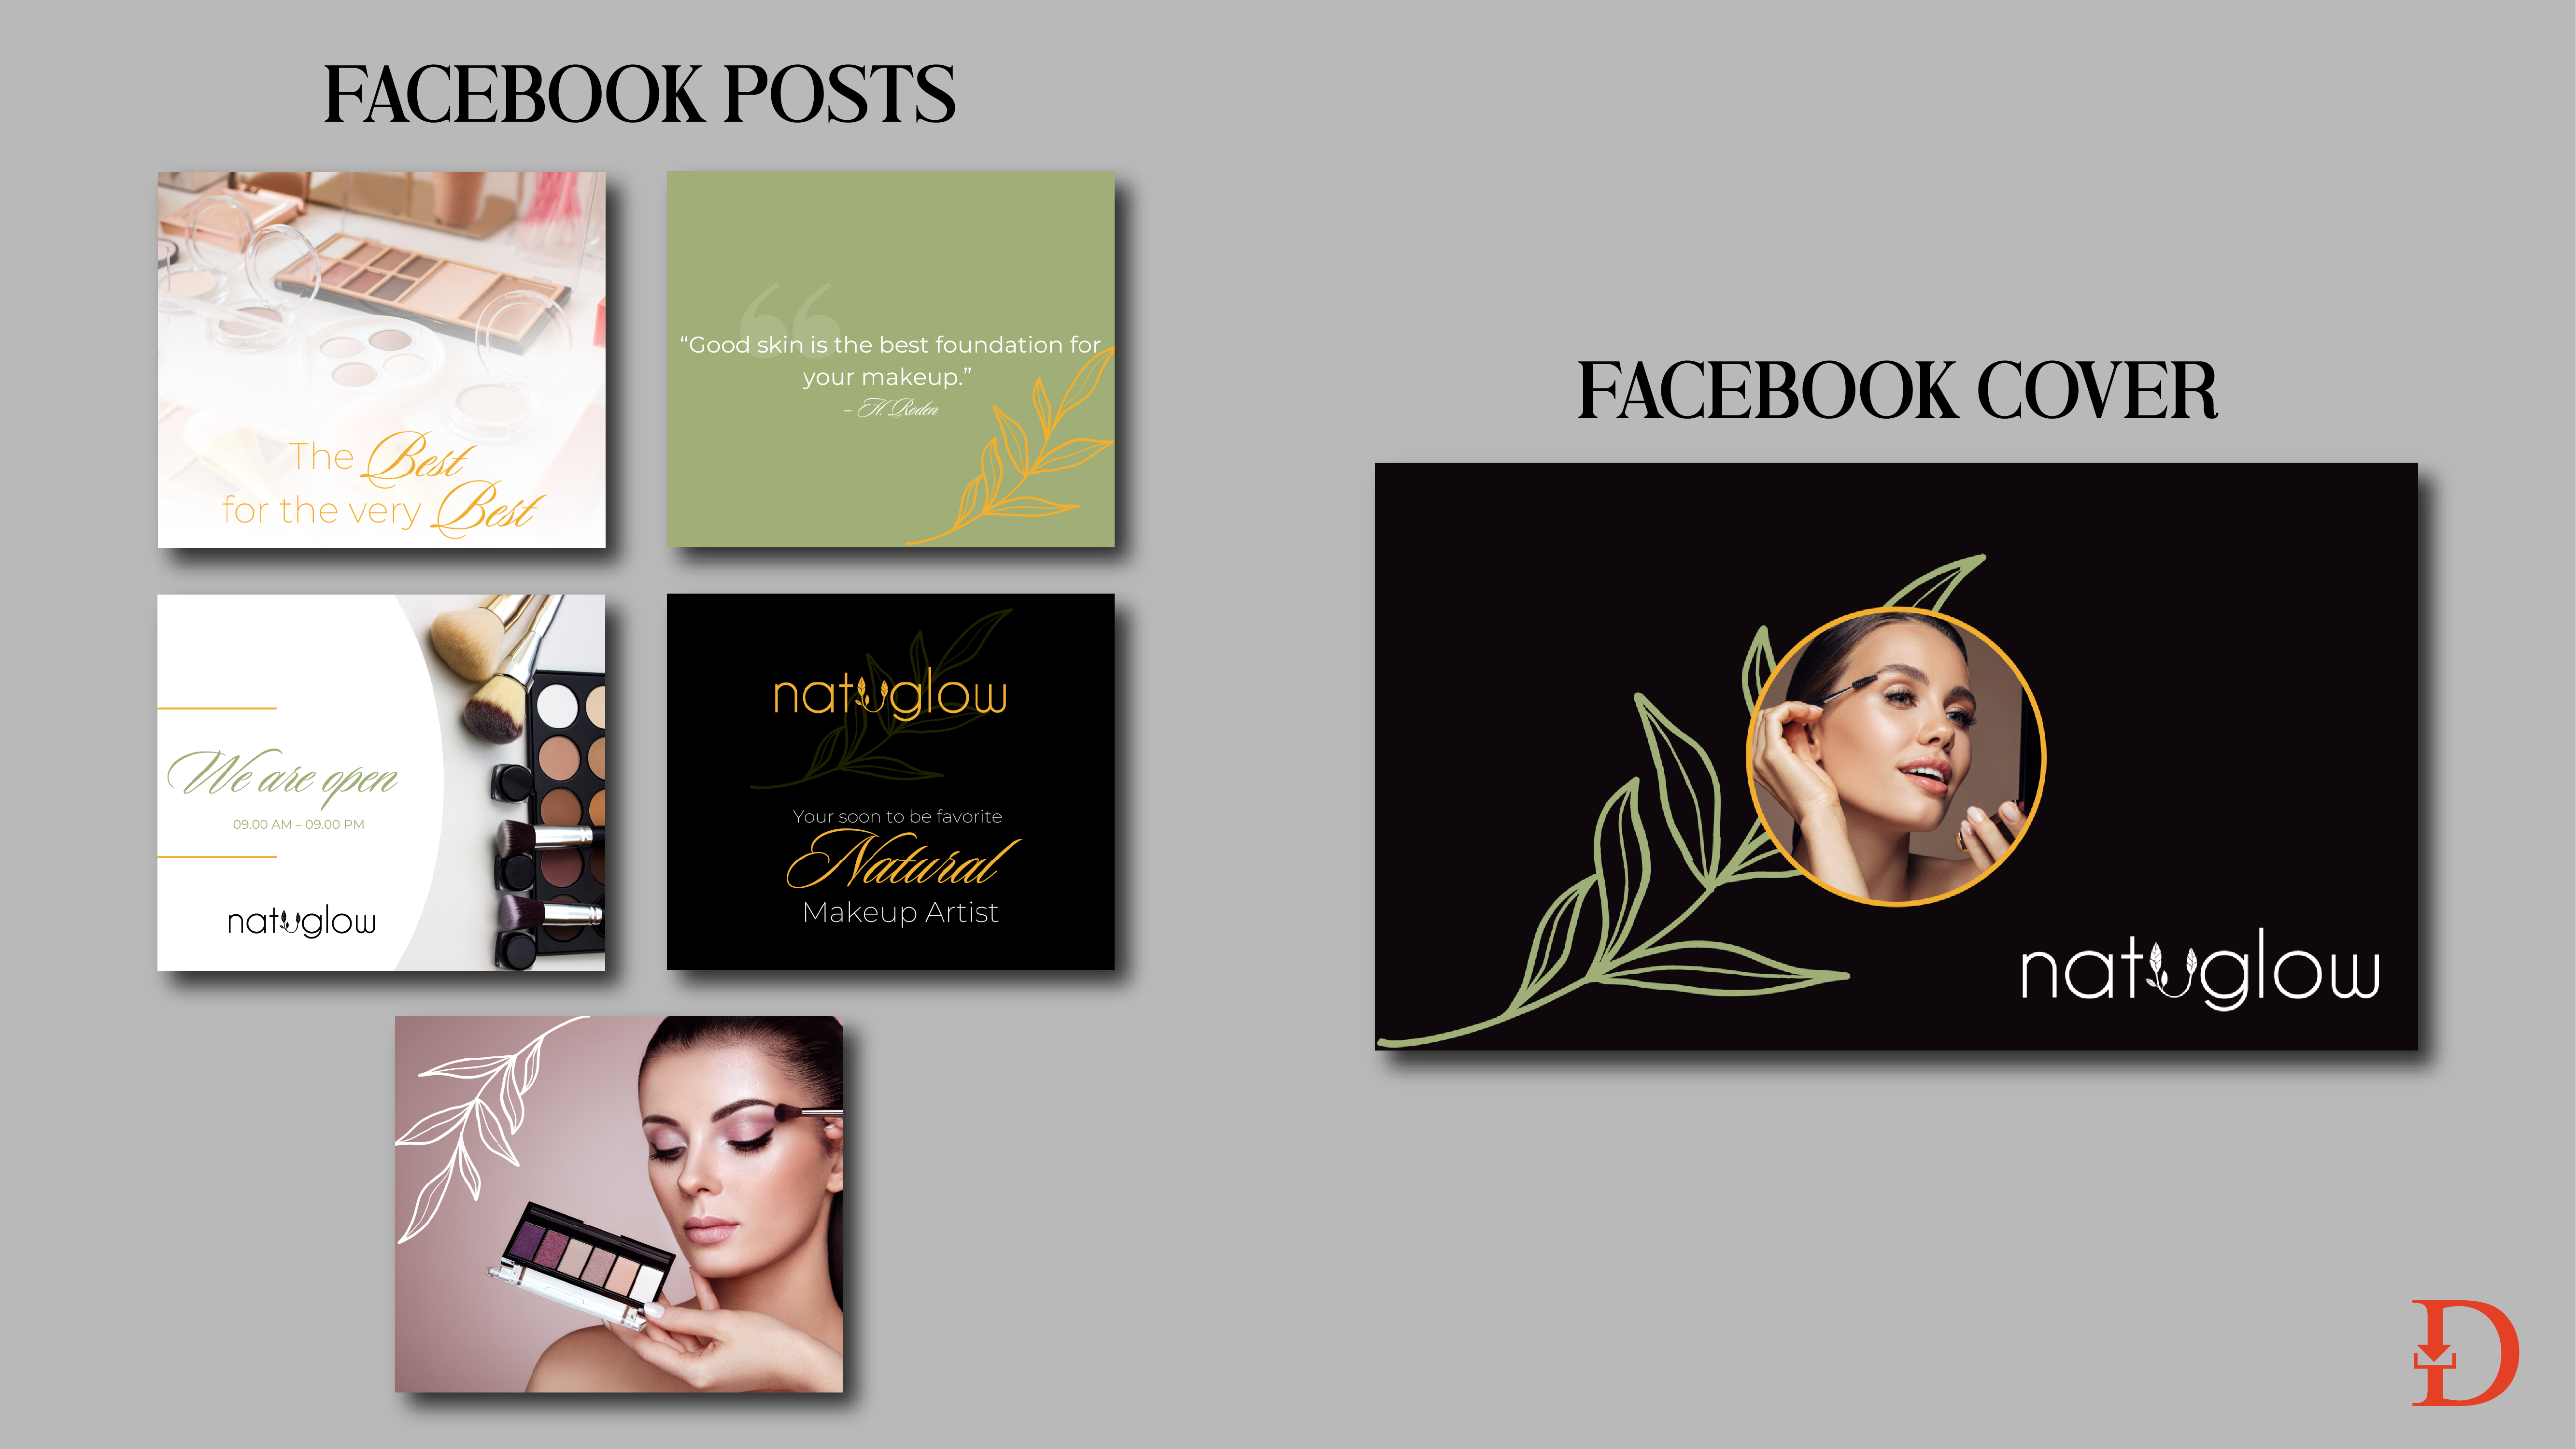 facebook posts and facebook cover